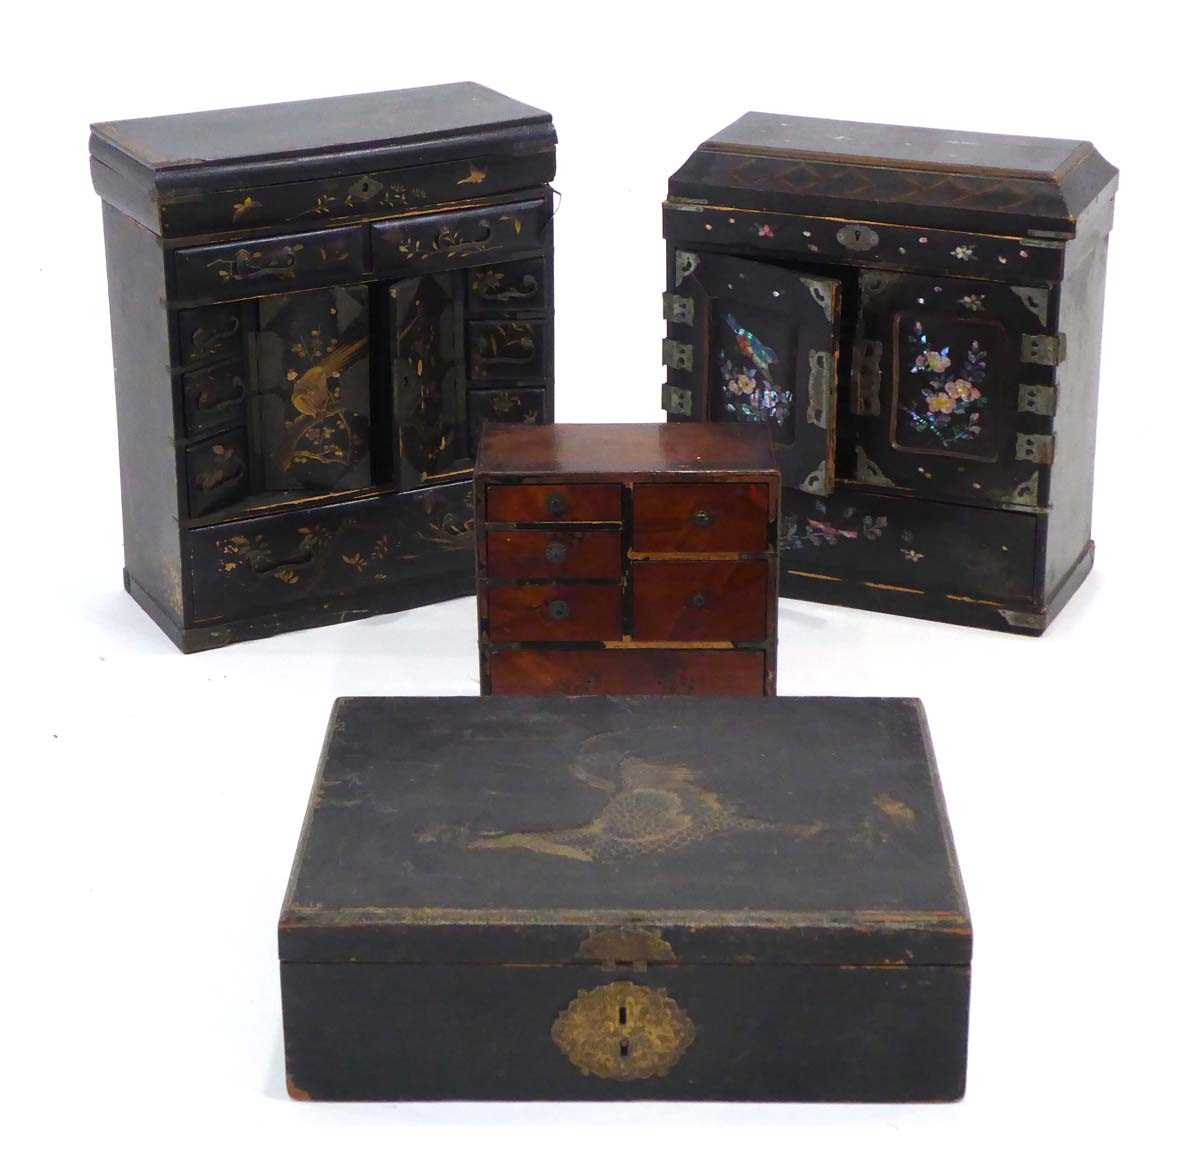 A group of Oriental and chinoiserie lacquered boxes including two table-top cabinets, a lift-lid box